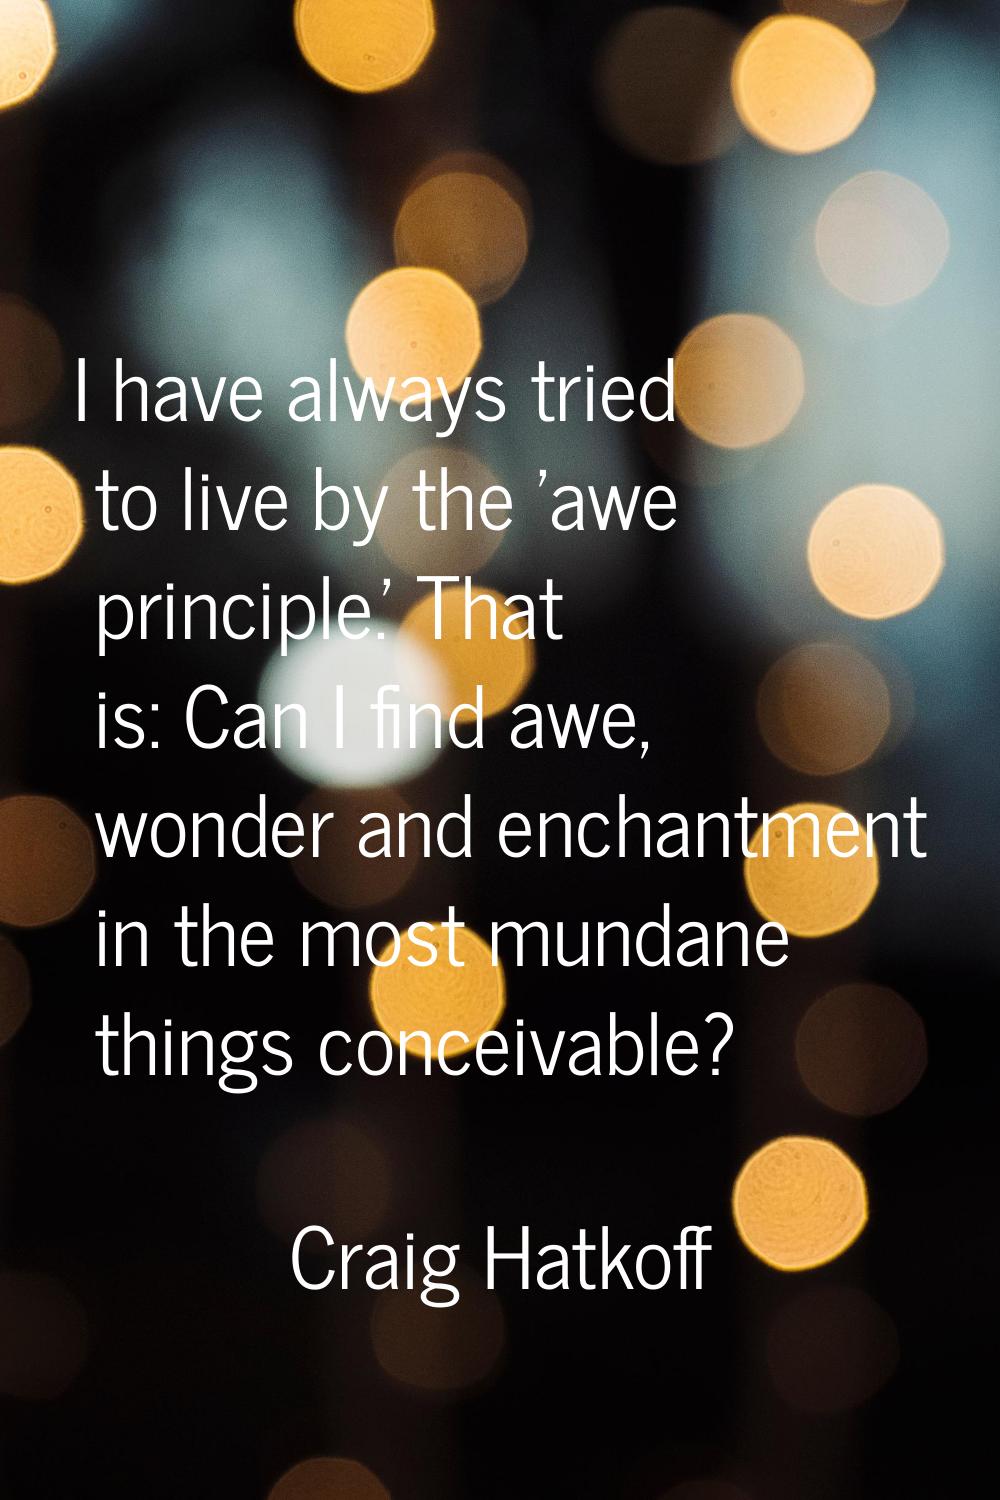 I have always tried to live by the 'awe principle.' That is: Can I find awe, wonder and enchantment